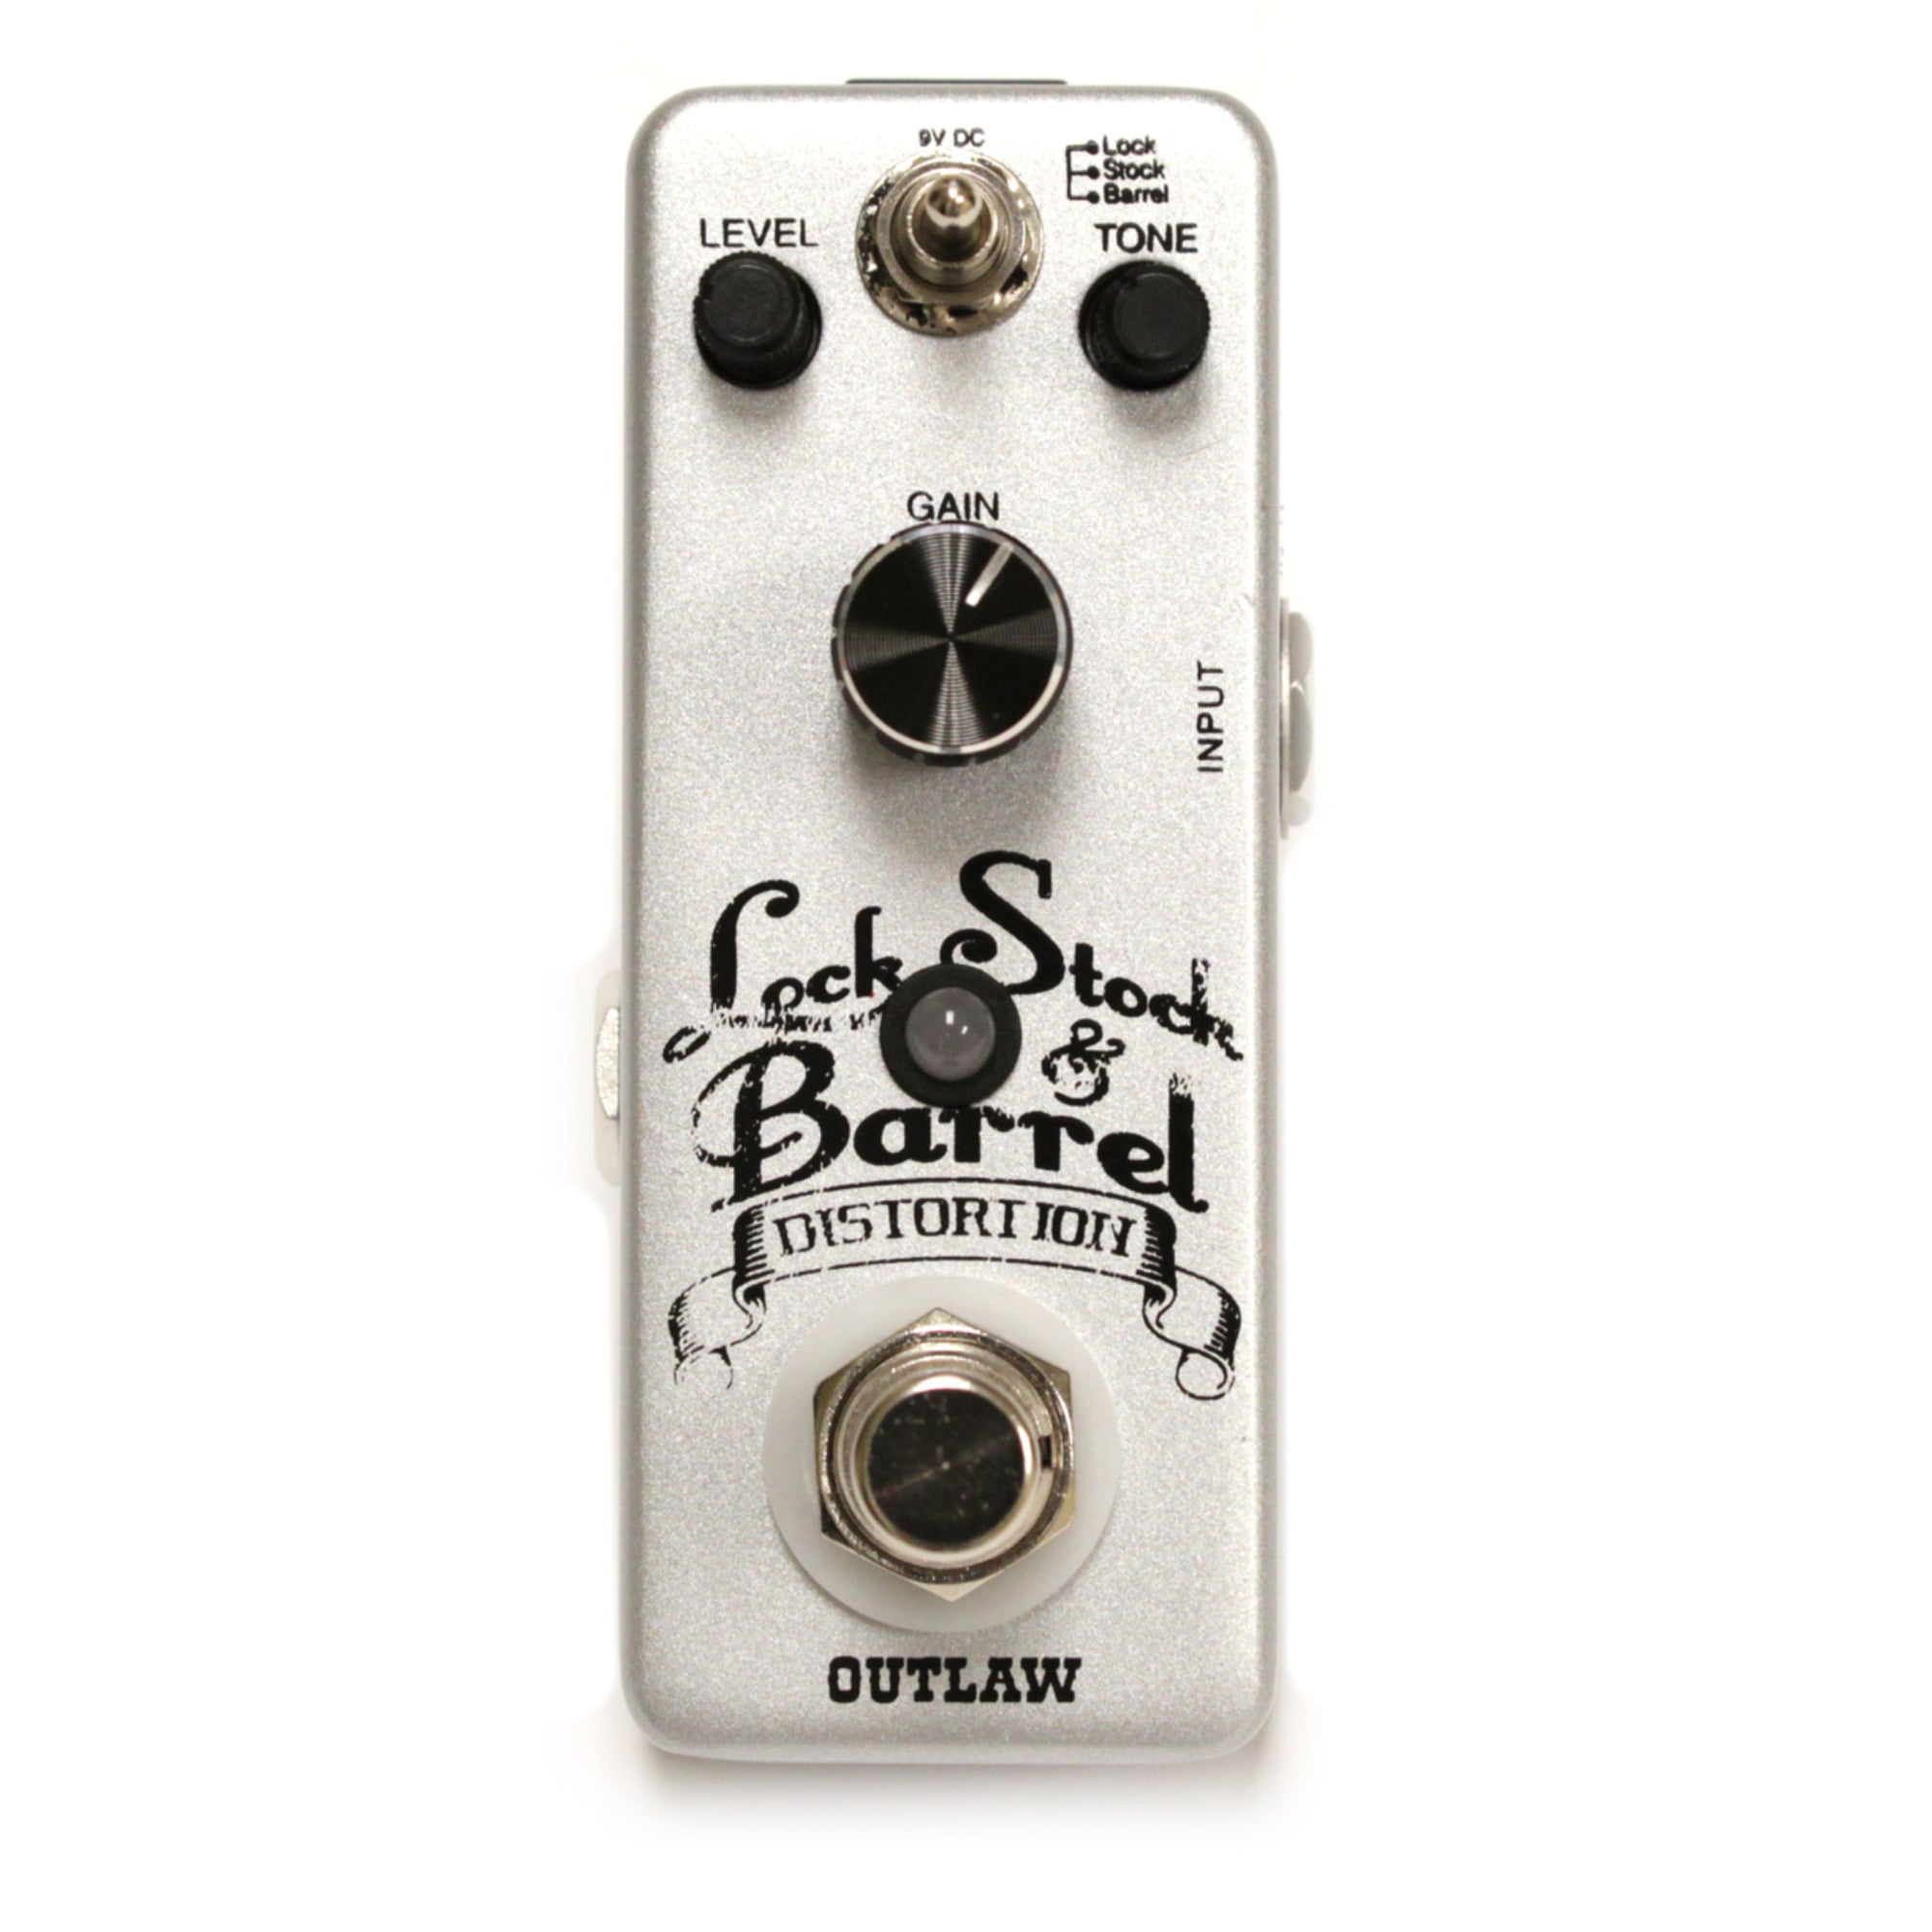 Outlaw Lock Stock Barrel Distortion Pedal